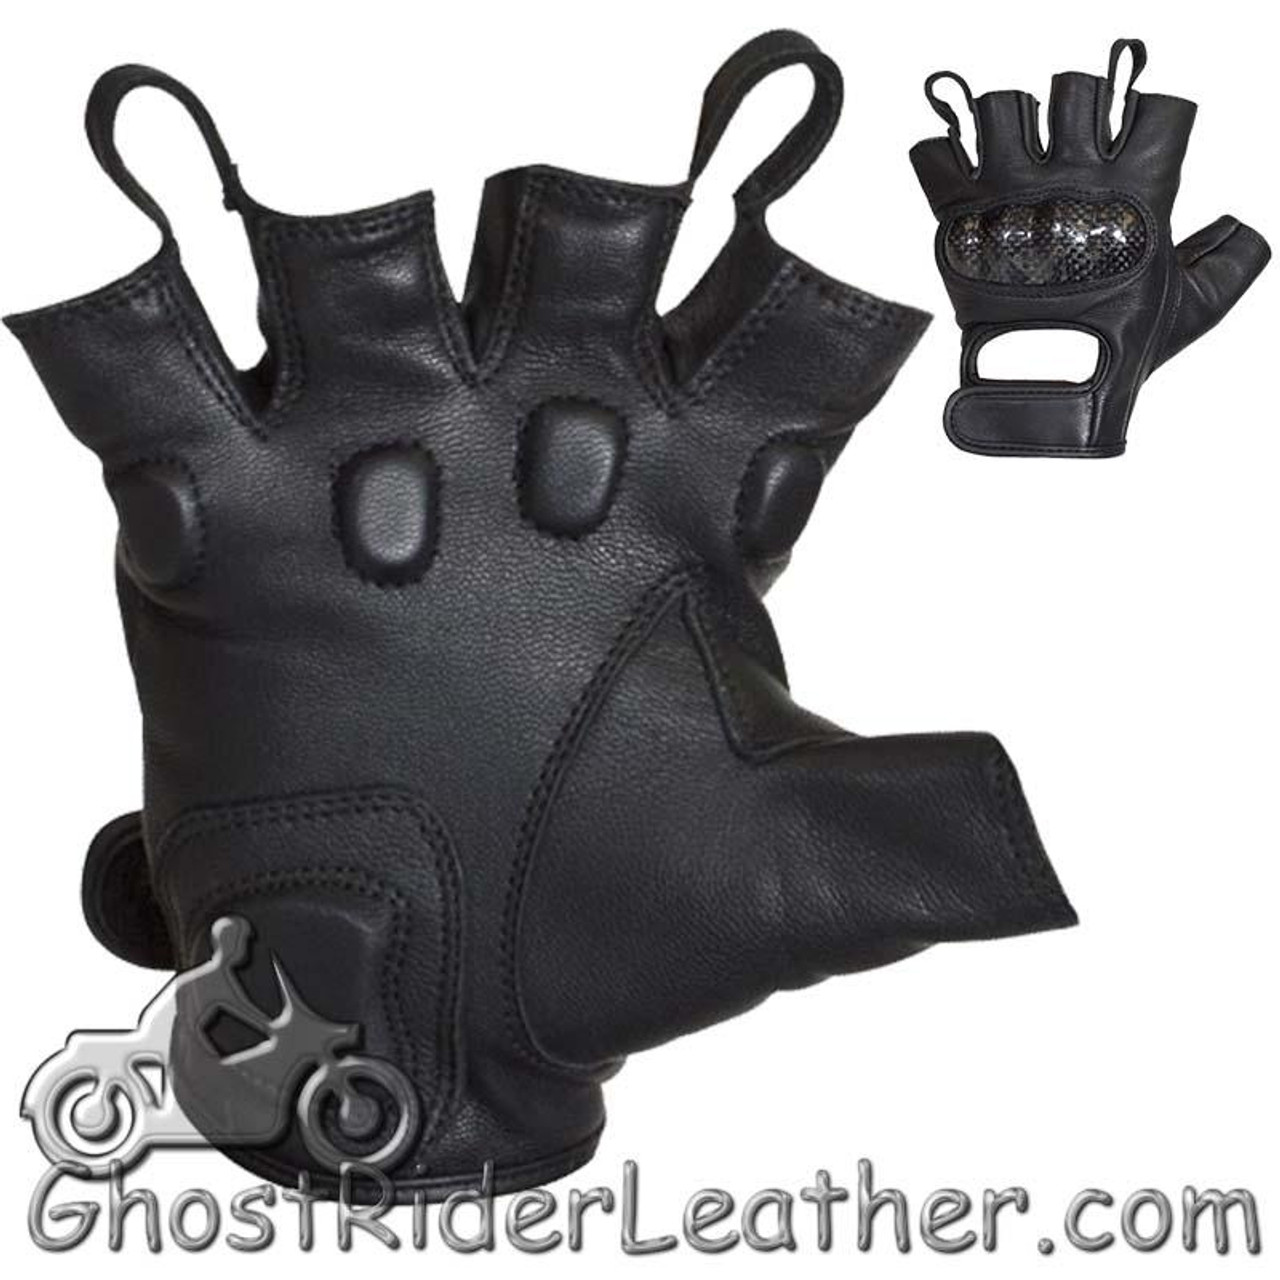 Studded Fingerless Leather Motorcycle Gloves